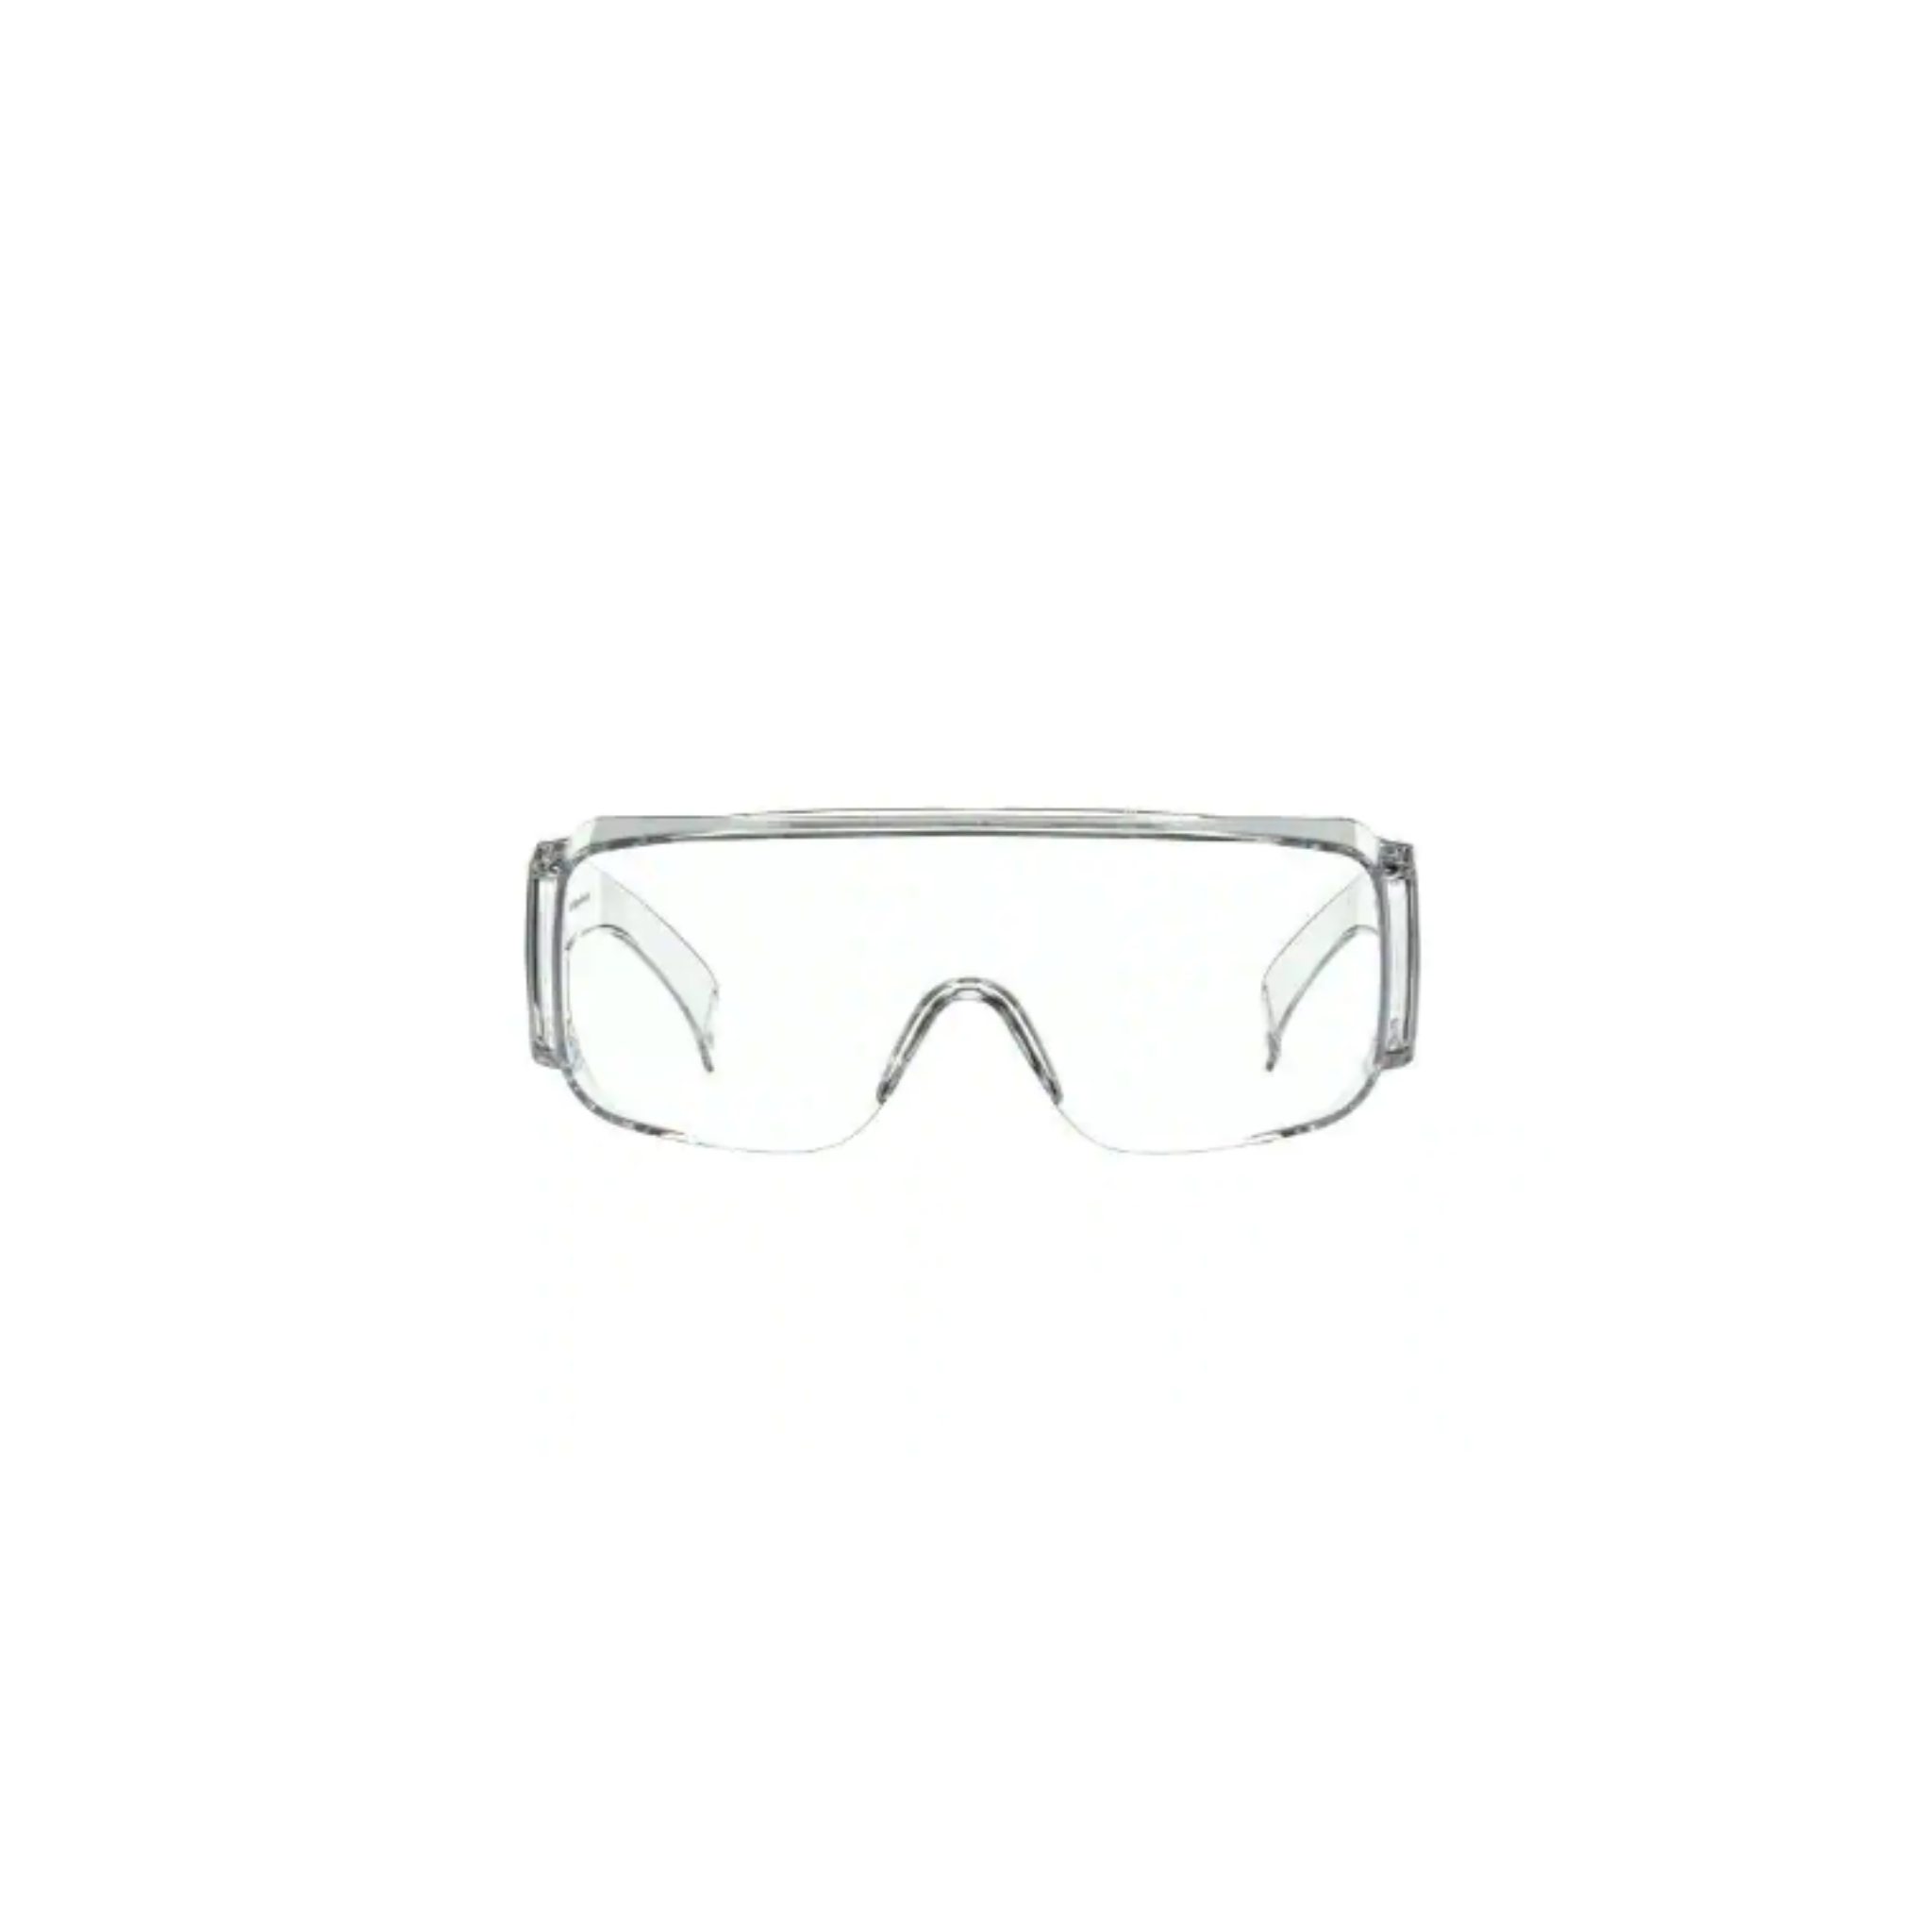 3M Over-the-Glass Safety Glasses Eyewear